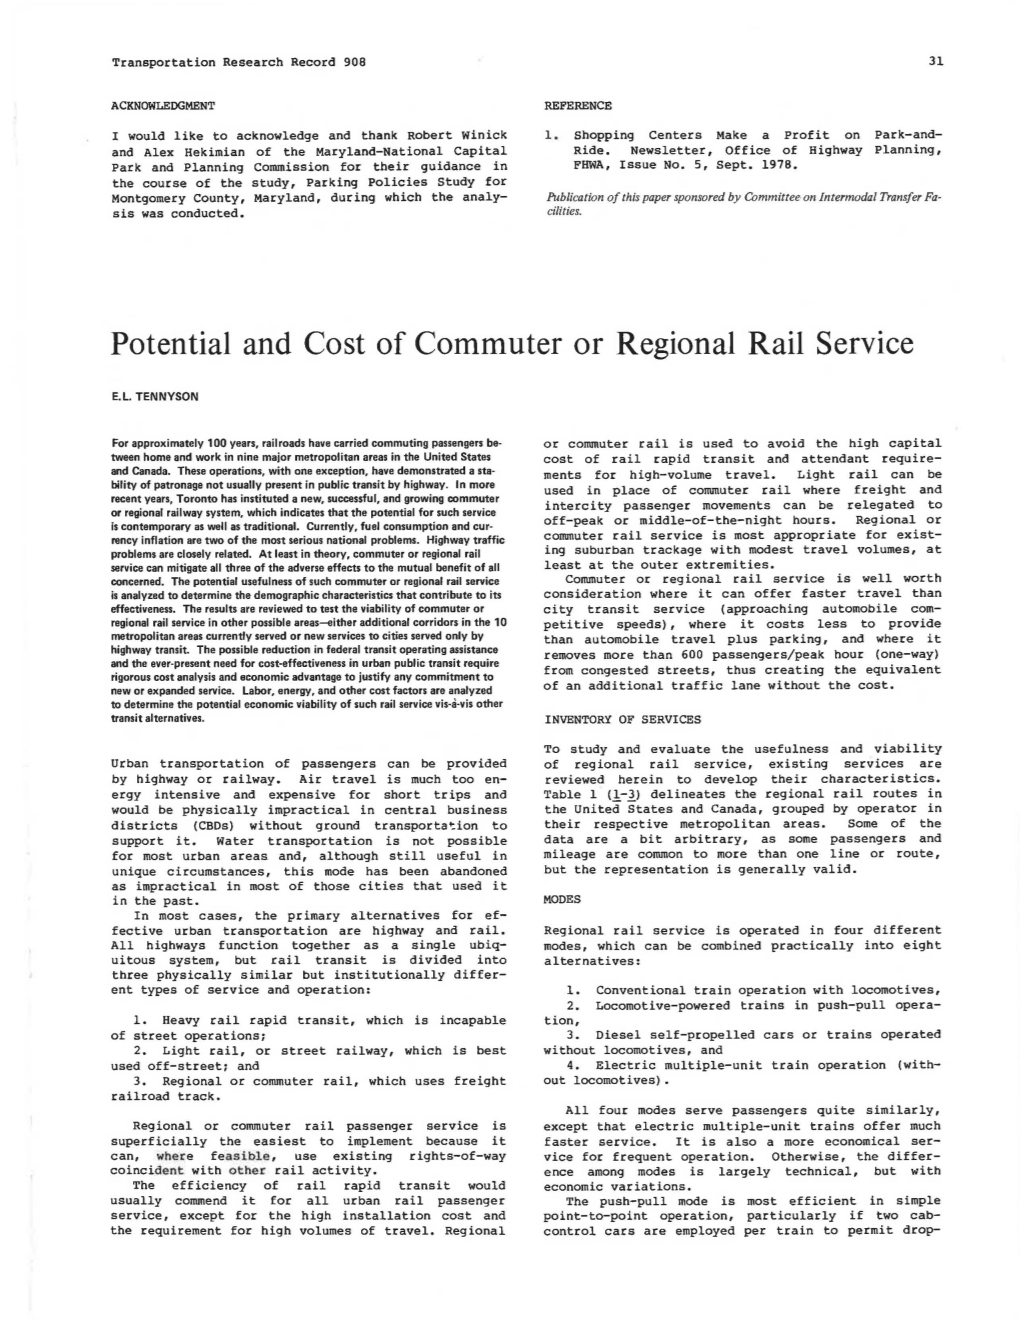 Potential and Cost of Commuter Or Regional Rail Service